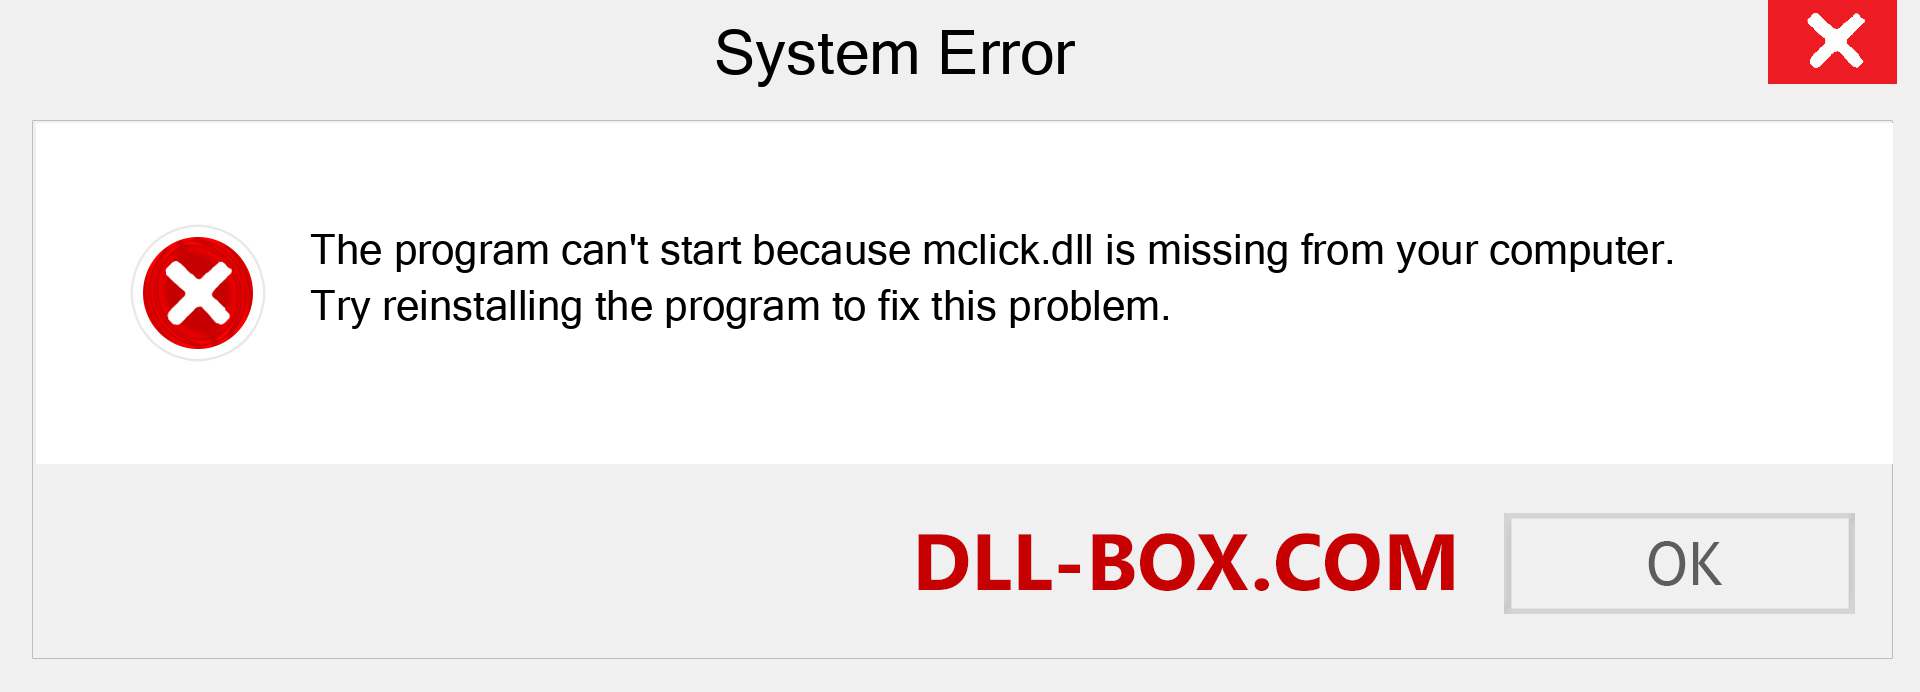  mclick.dll file is missing?. Download for Windows 7, 8, 10 - Fix  mclick dll Missing Error on Windows, photos, images